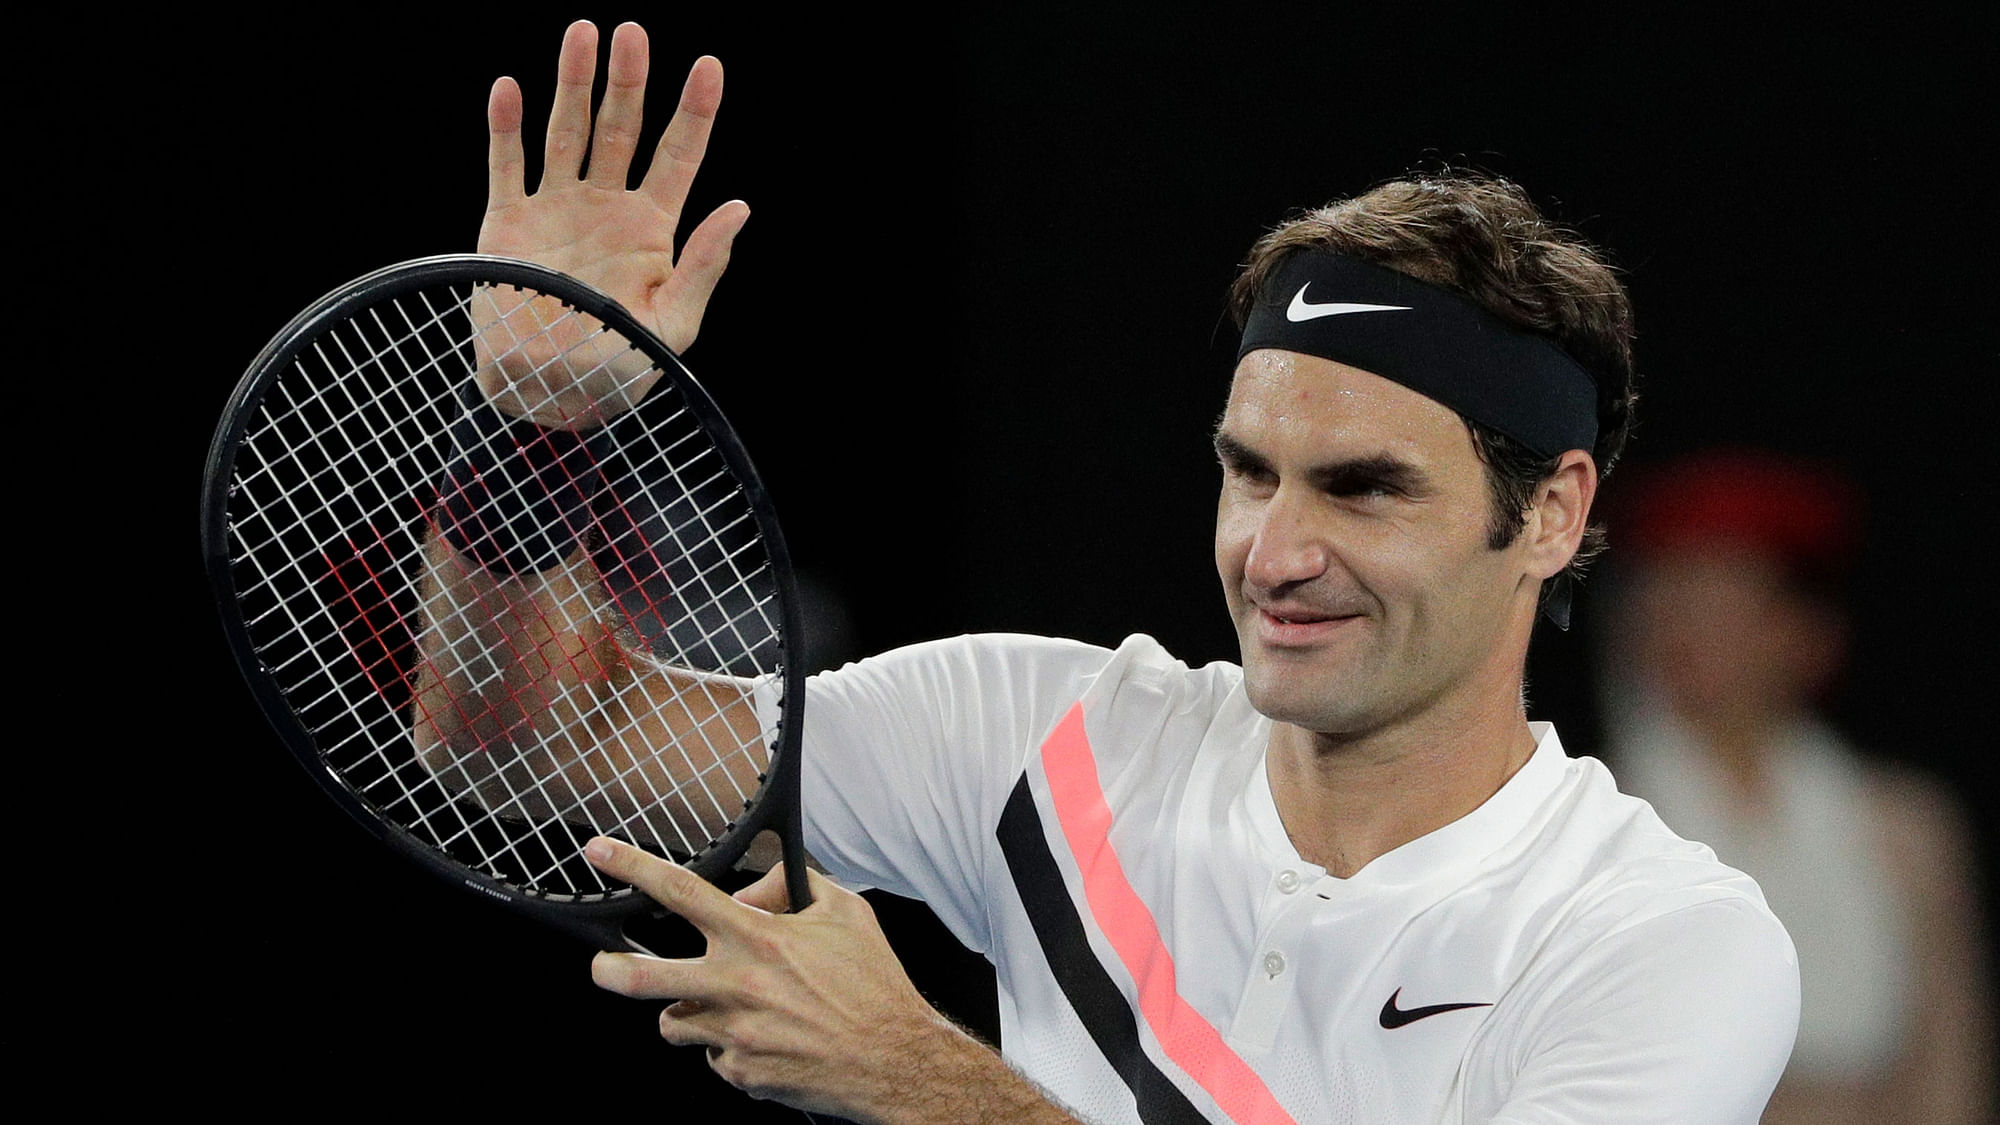 Roger Federer gestures to the crowd after defeating Tomas Berdych in the quarter-final of the Australian Open.